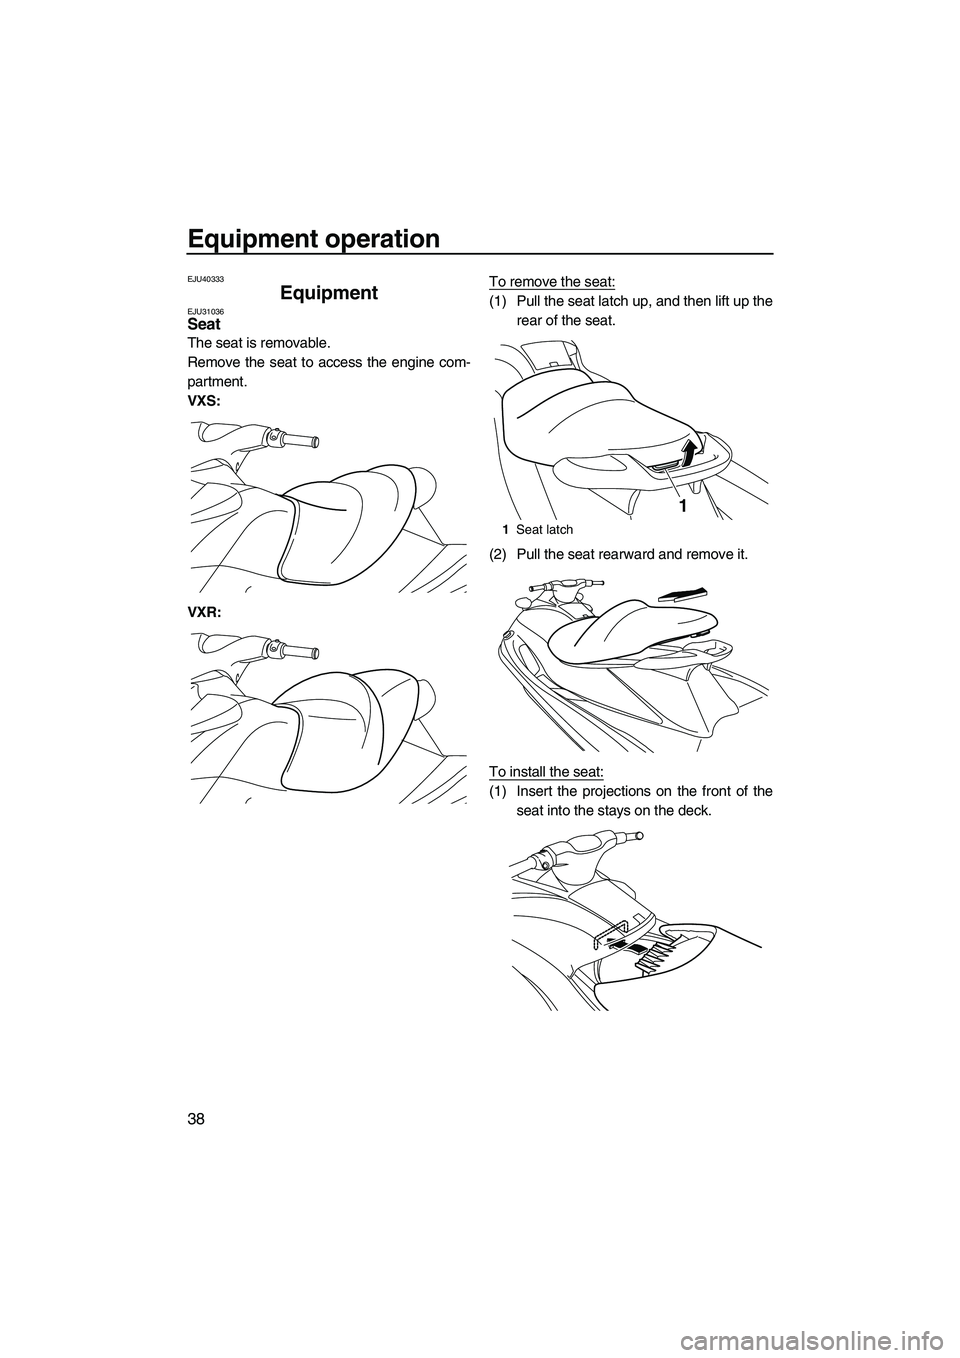 YAMAHA VXS 2012 Service Manual Equipment operation
38
EJU40333
Equipment EJU31036Seat 
The seat is removable.
Remove the seat to access the engine com-
partment.
VXS:
VXR:To remove the seat:
(1) Pull the seat latch up, and then lif